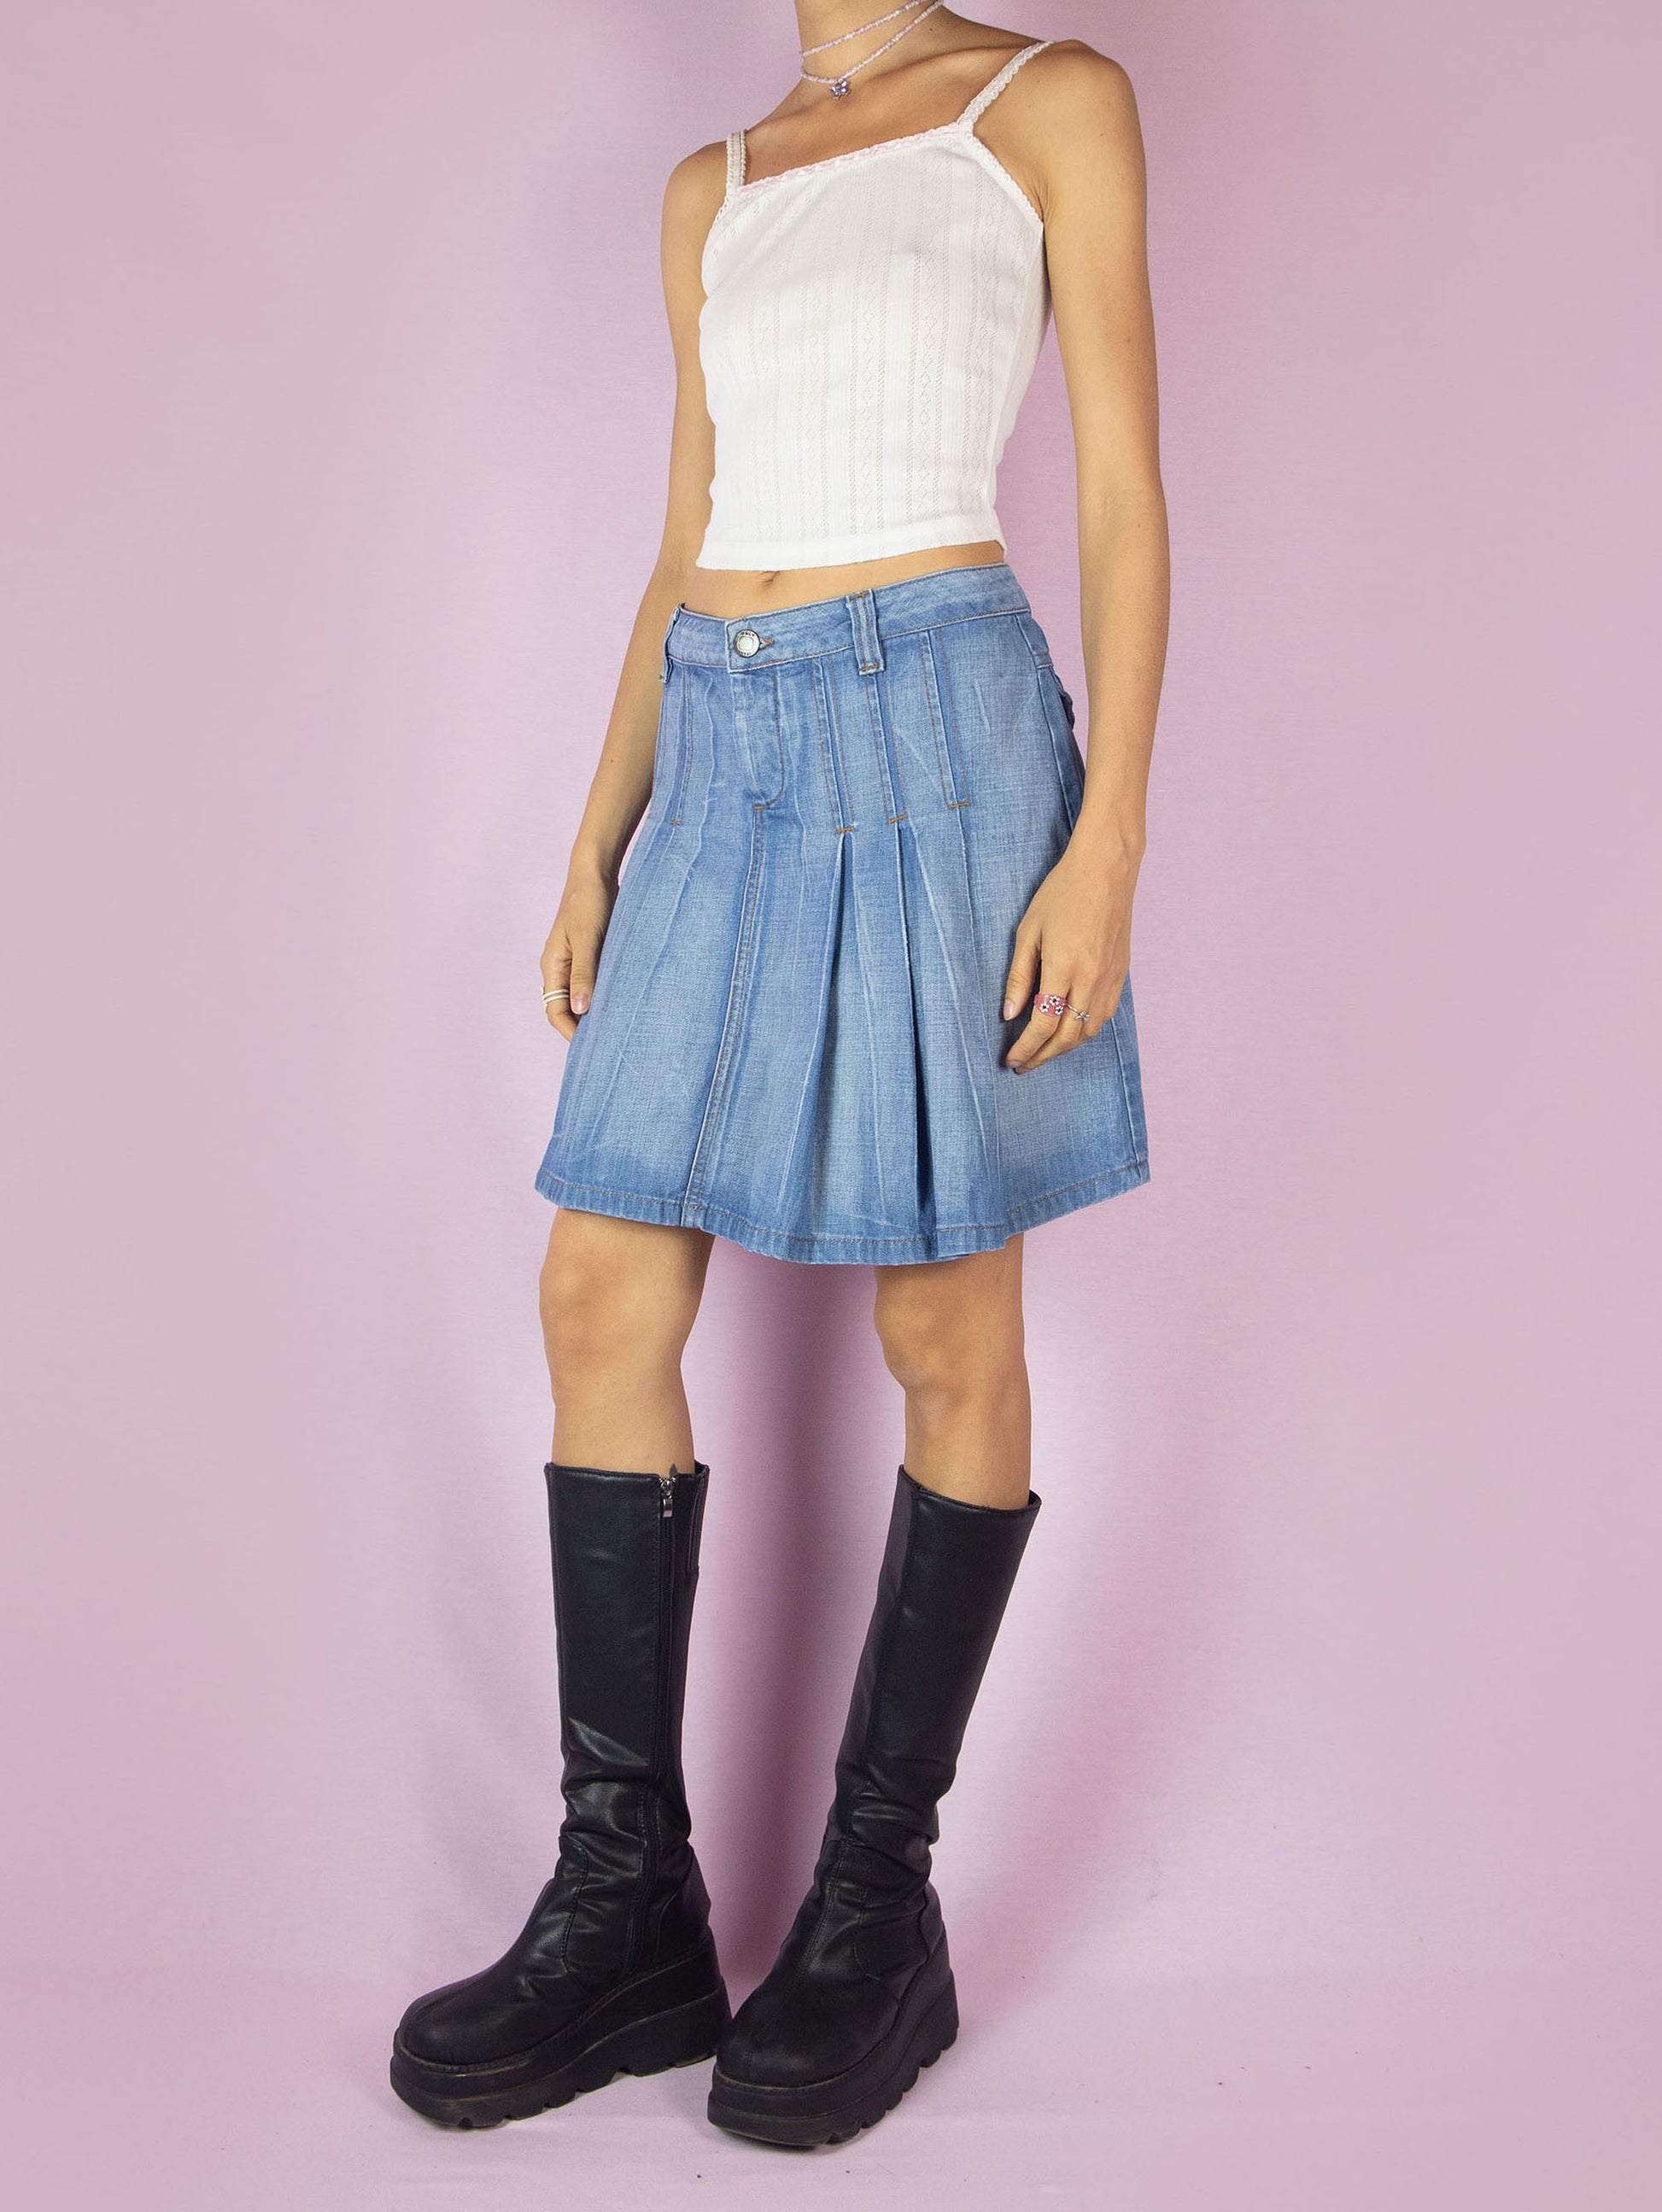 The Y2K Pleated Denim Mini Skirt is a vintage 2000s A-line jean skirt with an acid wash striped effect.